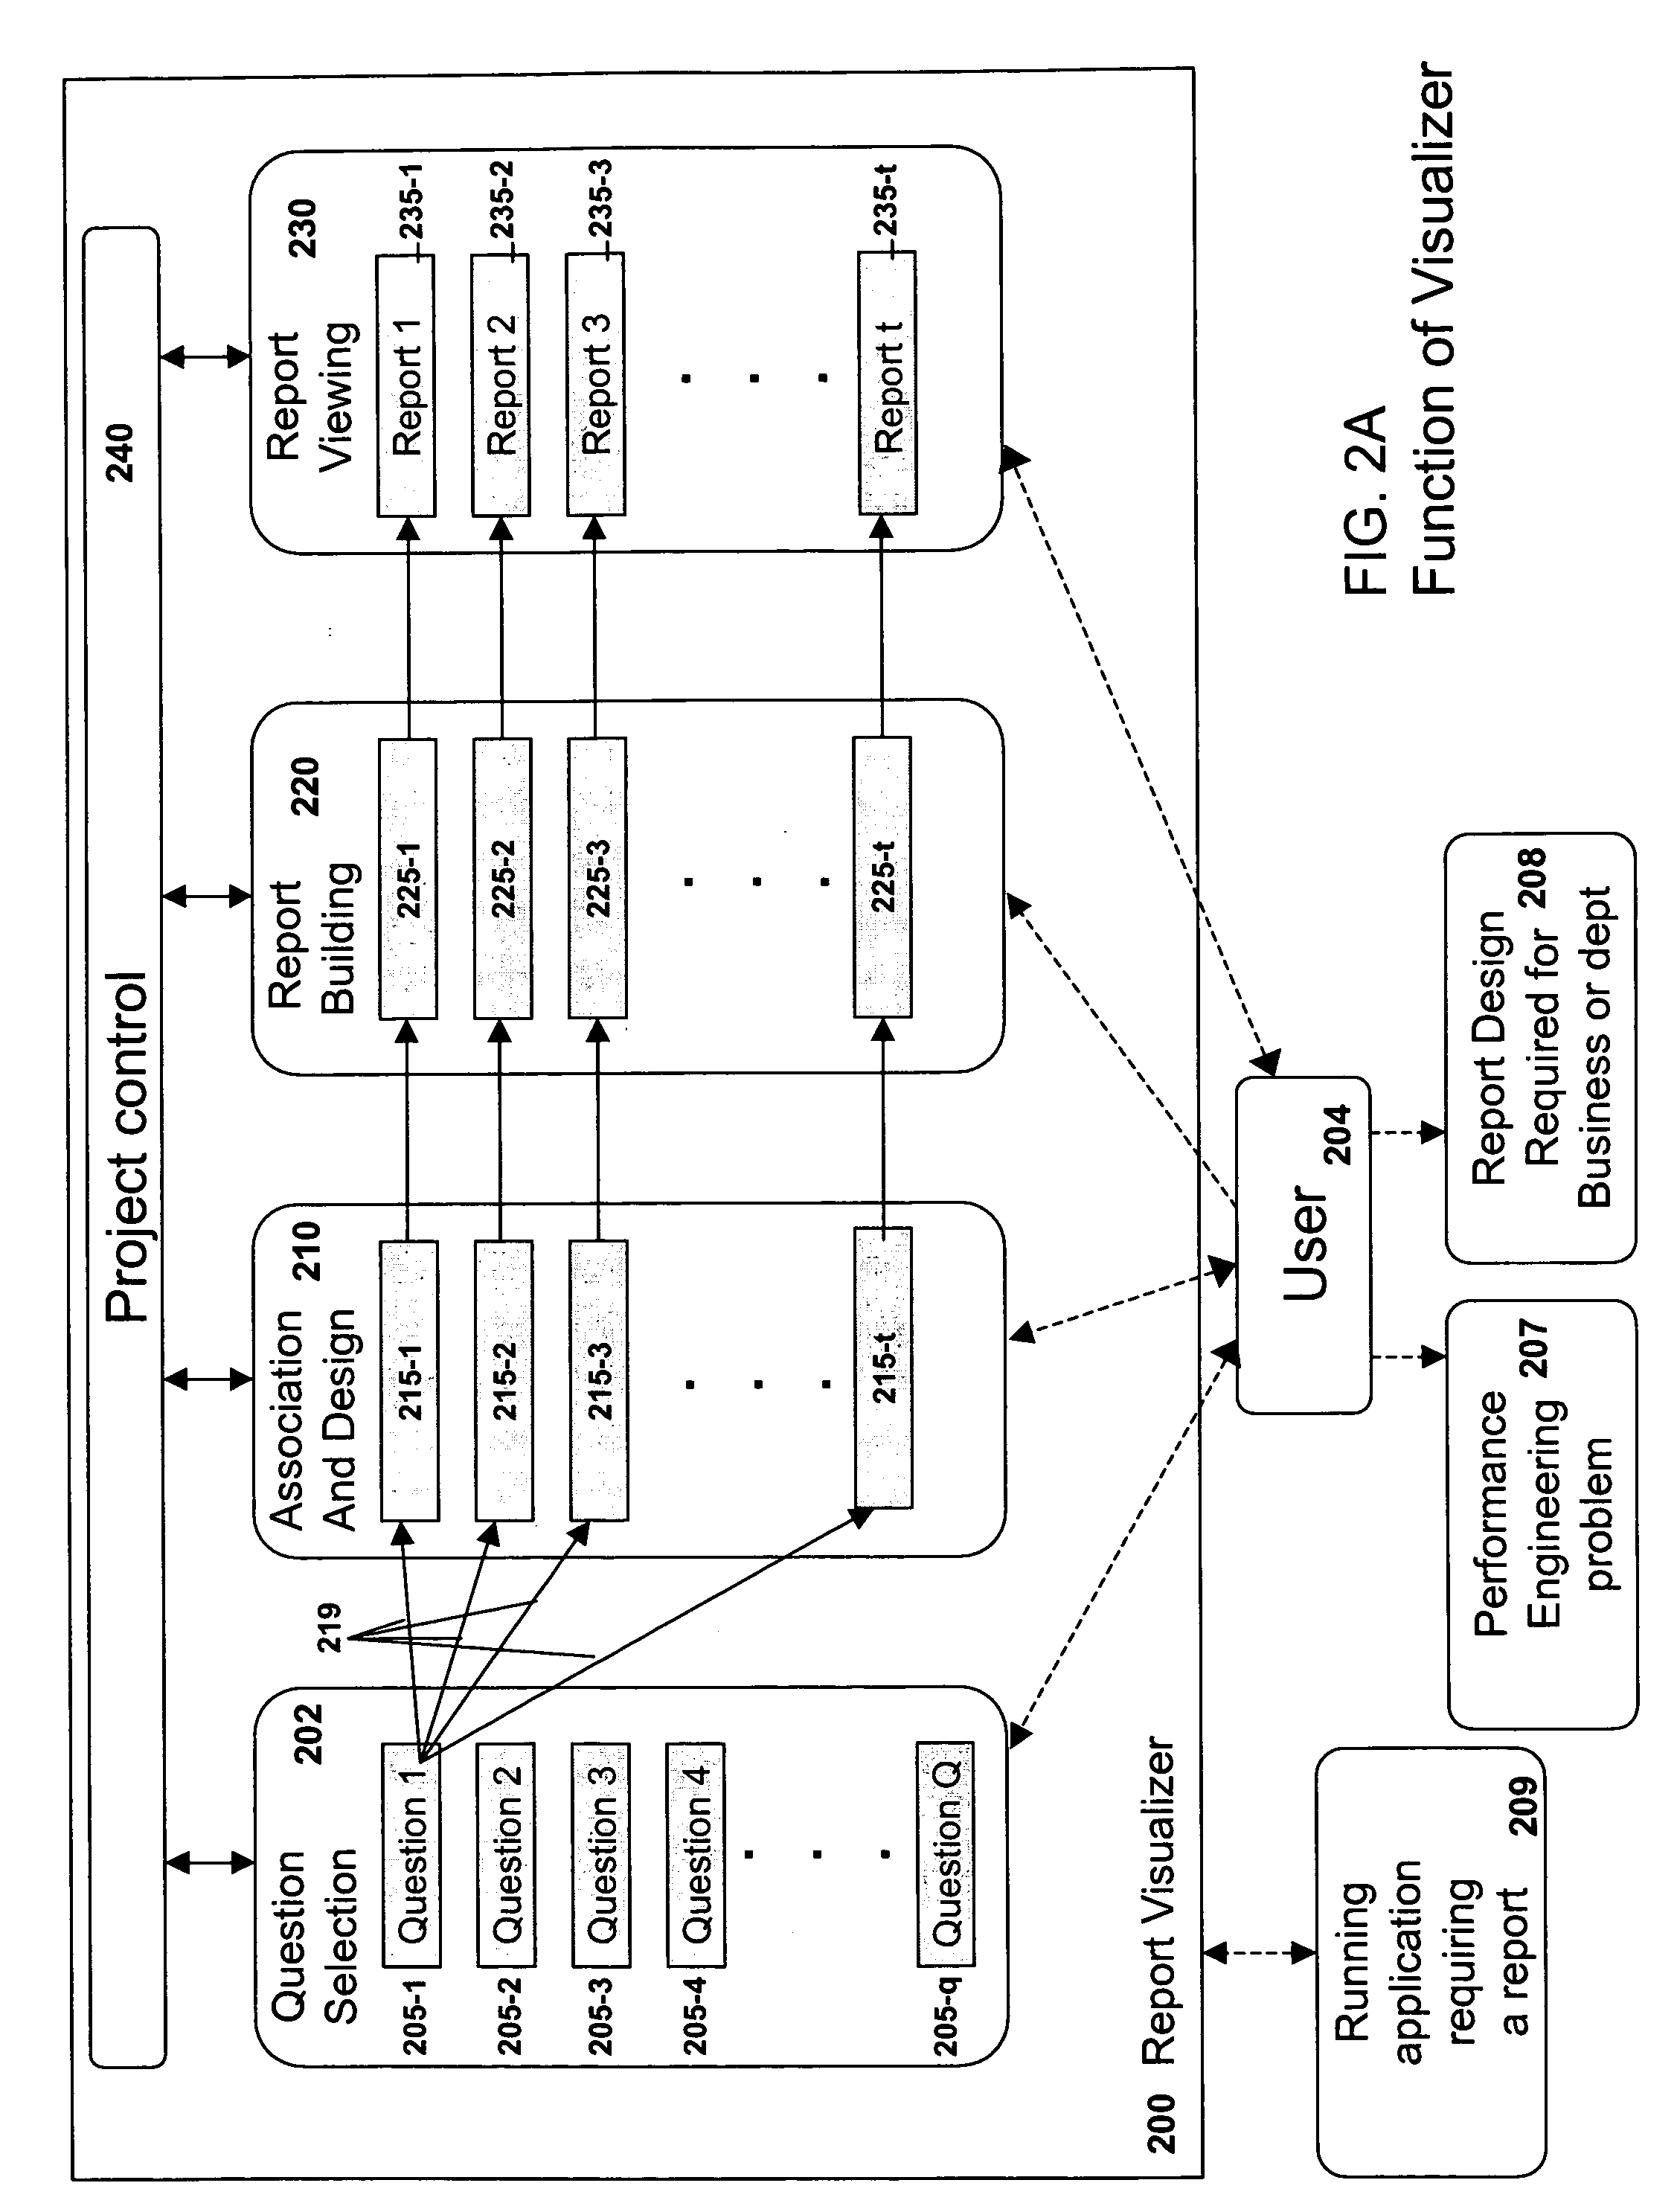 Method and apparatus for organizing, visualizing and using measured or modeled system statistics